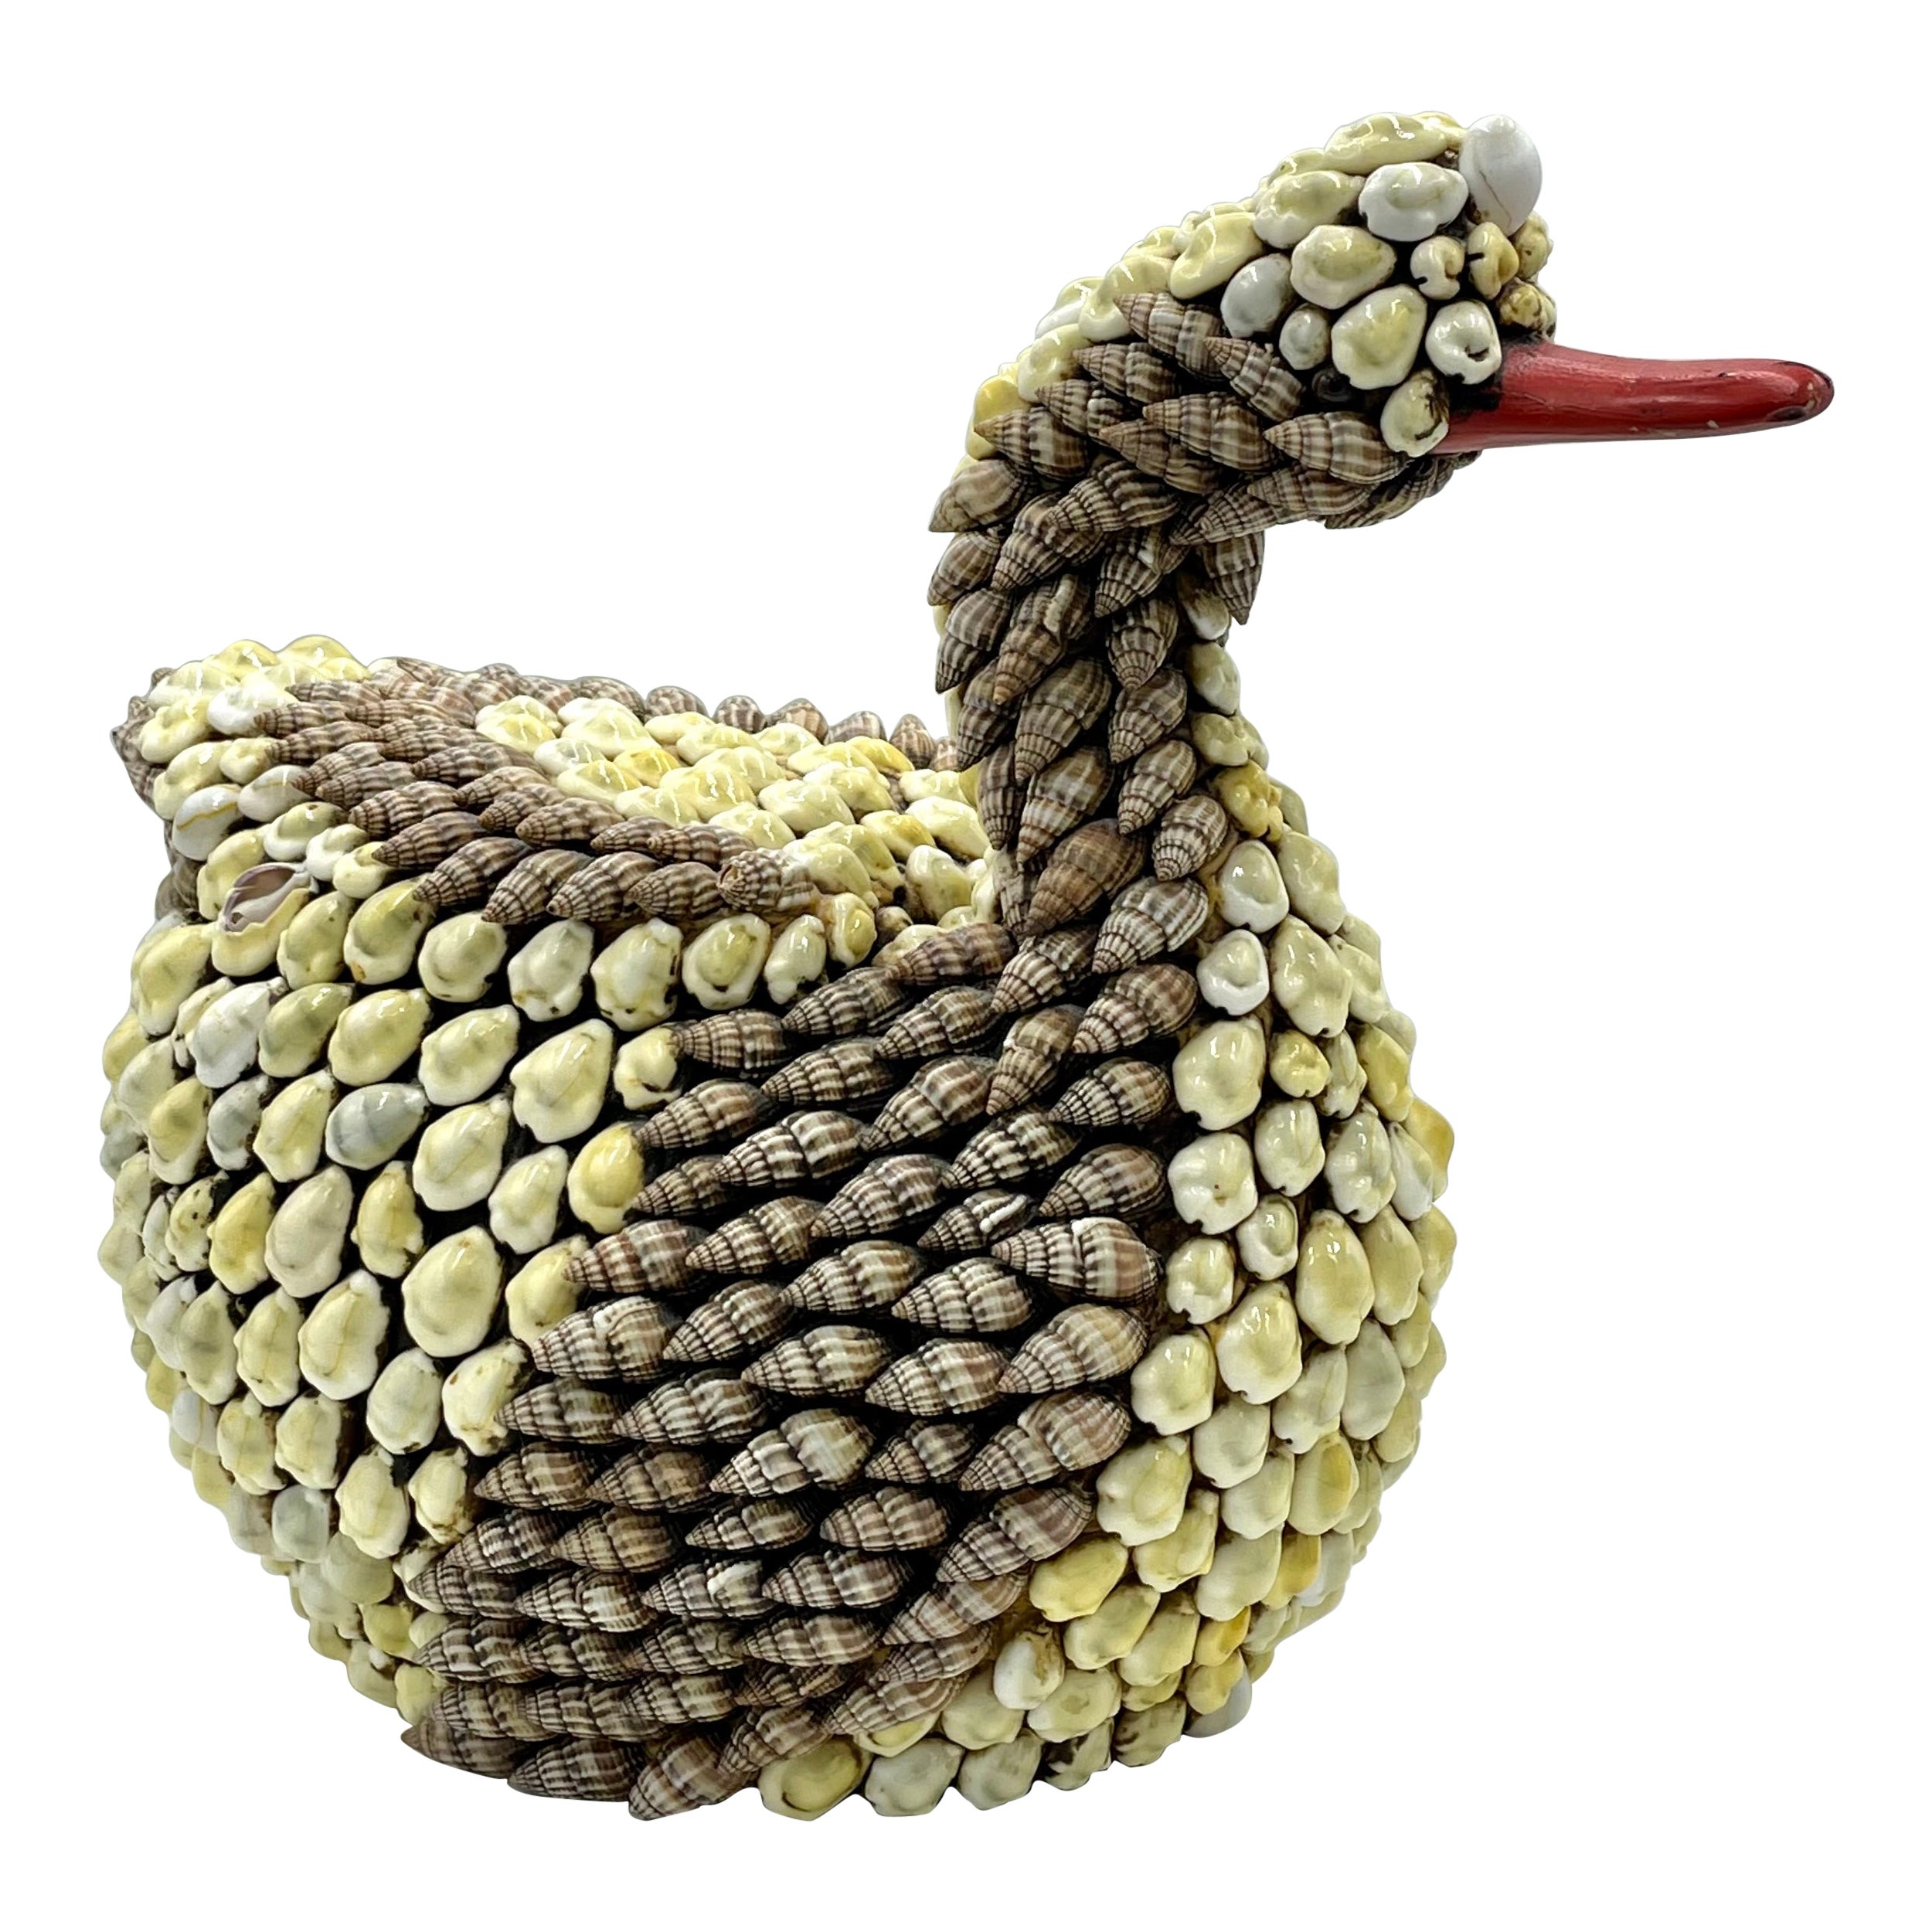 Anthony Redmile Shell Encrusted Duck or Swan Box Redmile Objects London England